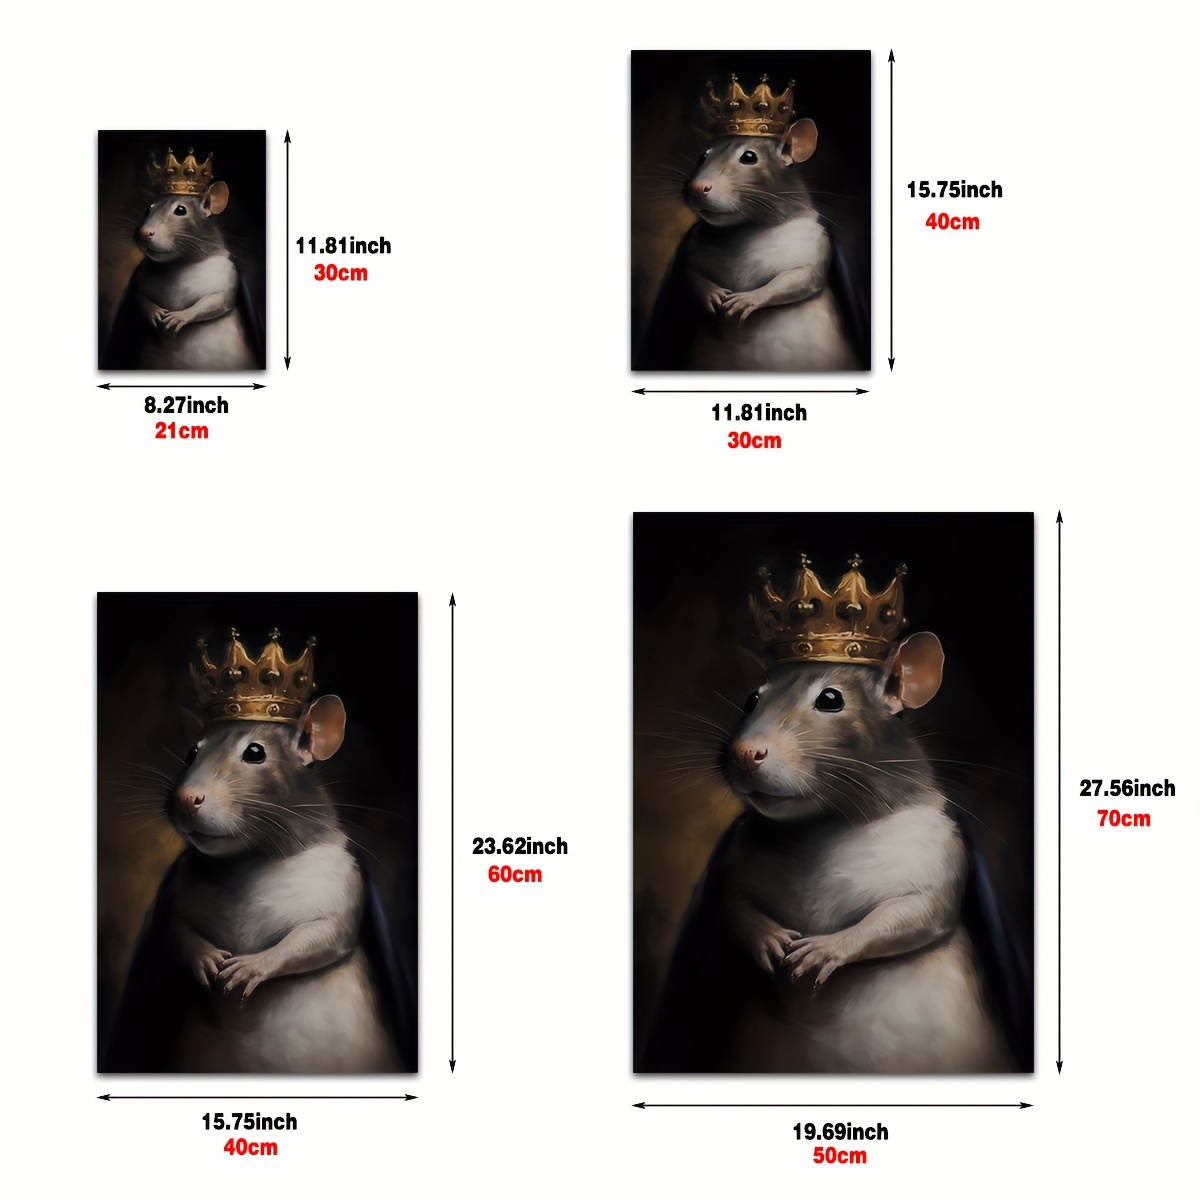 Rat King, Stretched Canvas